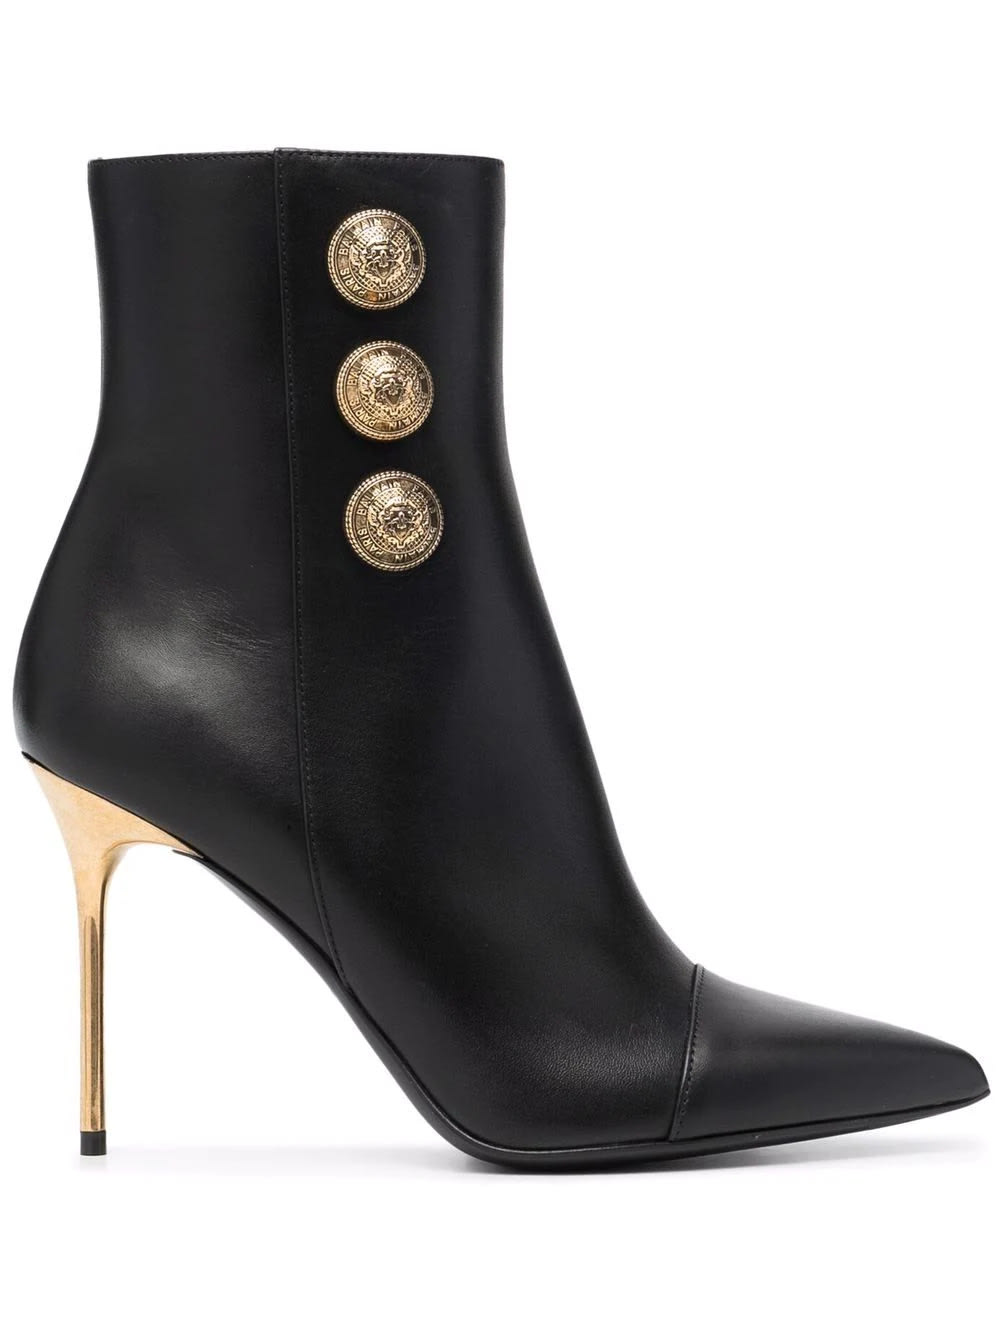 Balmain Roni Ankle Boot In Black Leather